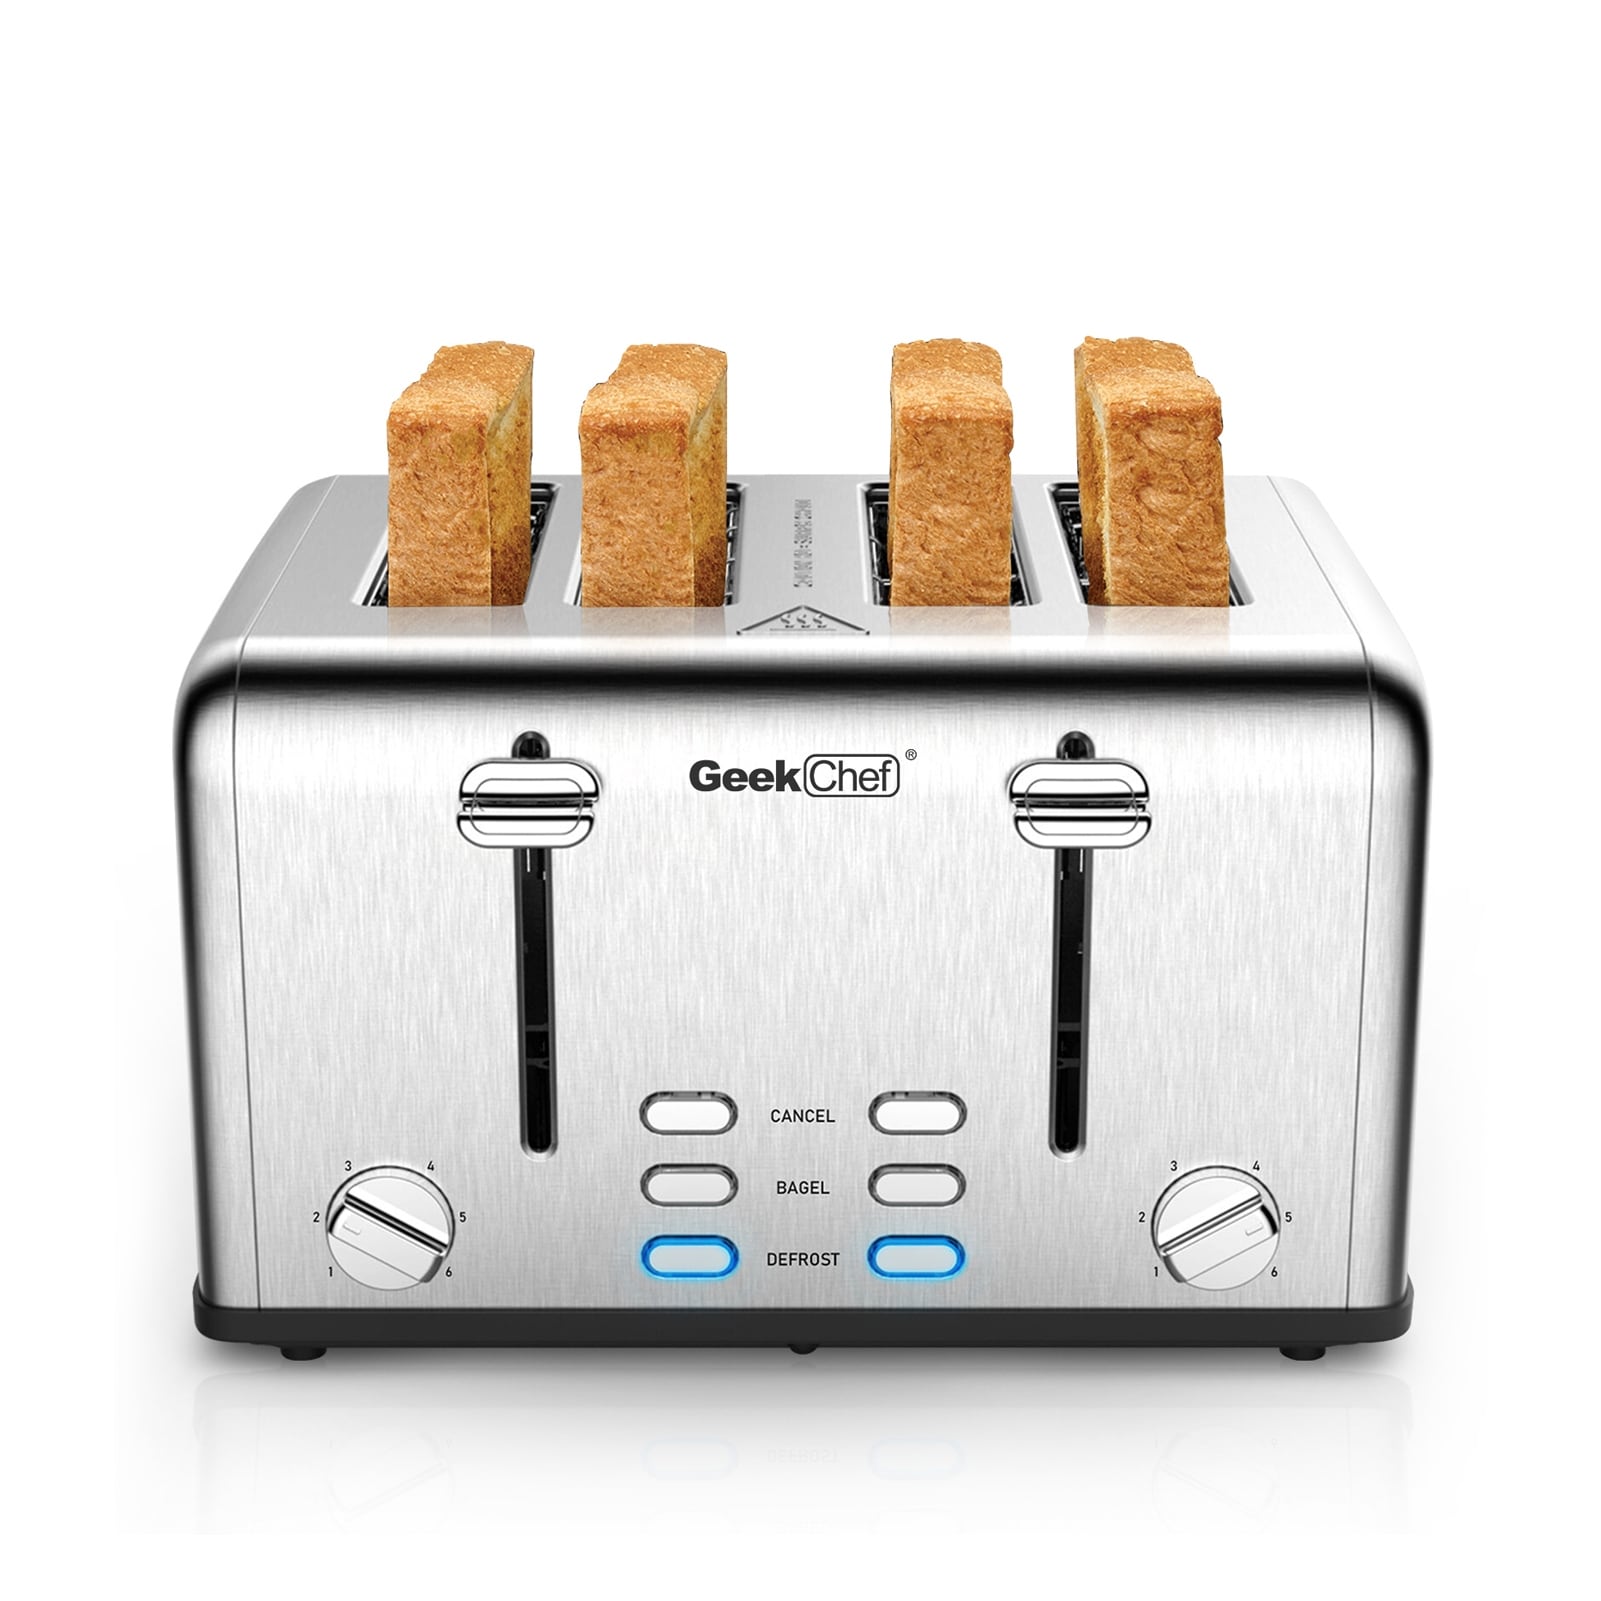 https://ak1.ostkcdn.com/images/products/is/images/direct/4cdb4f12b7af8127264f6f4bca662b03f1b896c1/Stainless-Steel-4-Slice-Toaster-Oven-With-Dual-Control-Panels.jpg